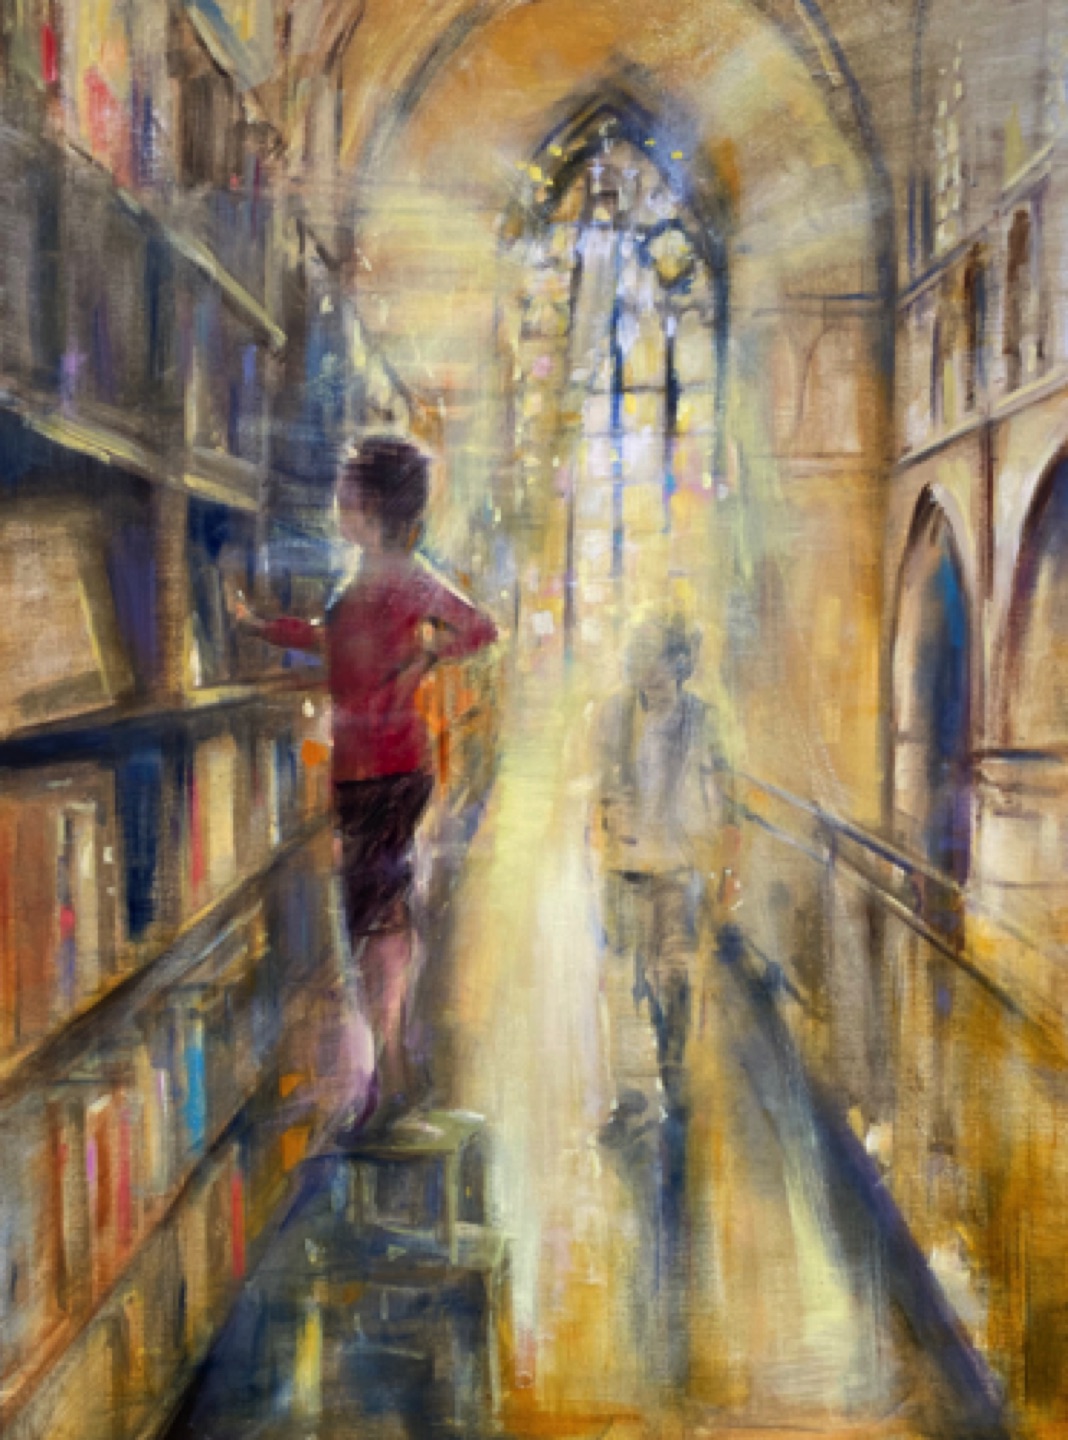 Gregg Chadwick
Carpe Librum (Maastricht)
48"x36"oil on linen 2021
Private Collection, Los Angeles, California

A magnificent bookstore in Maastricht, The Netherlands (Boekhandel Dominicanen) continues to inspire a series of artworks.